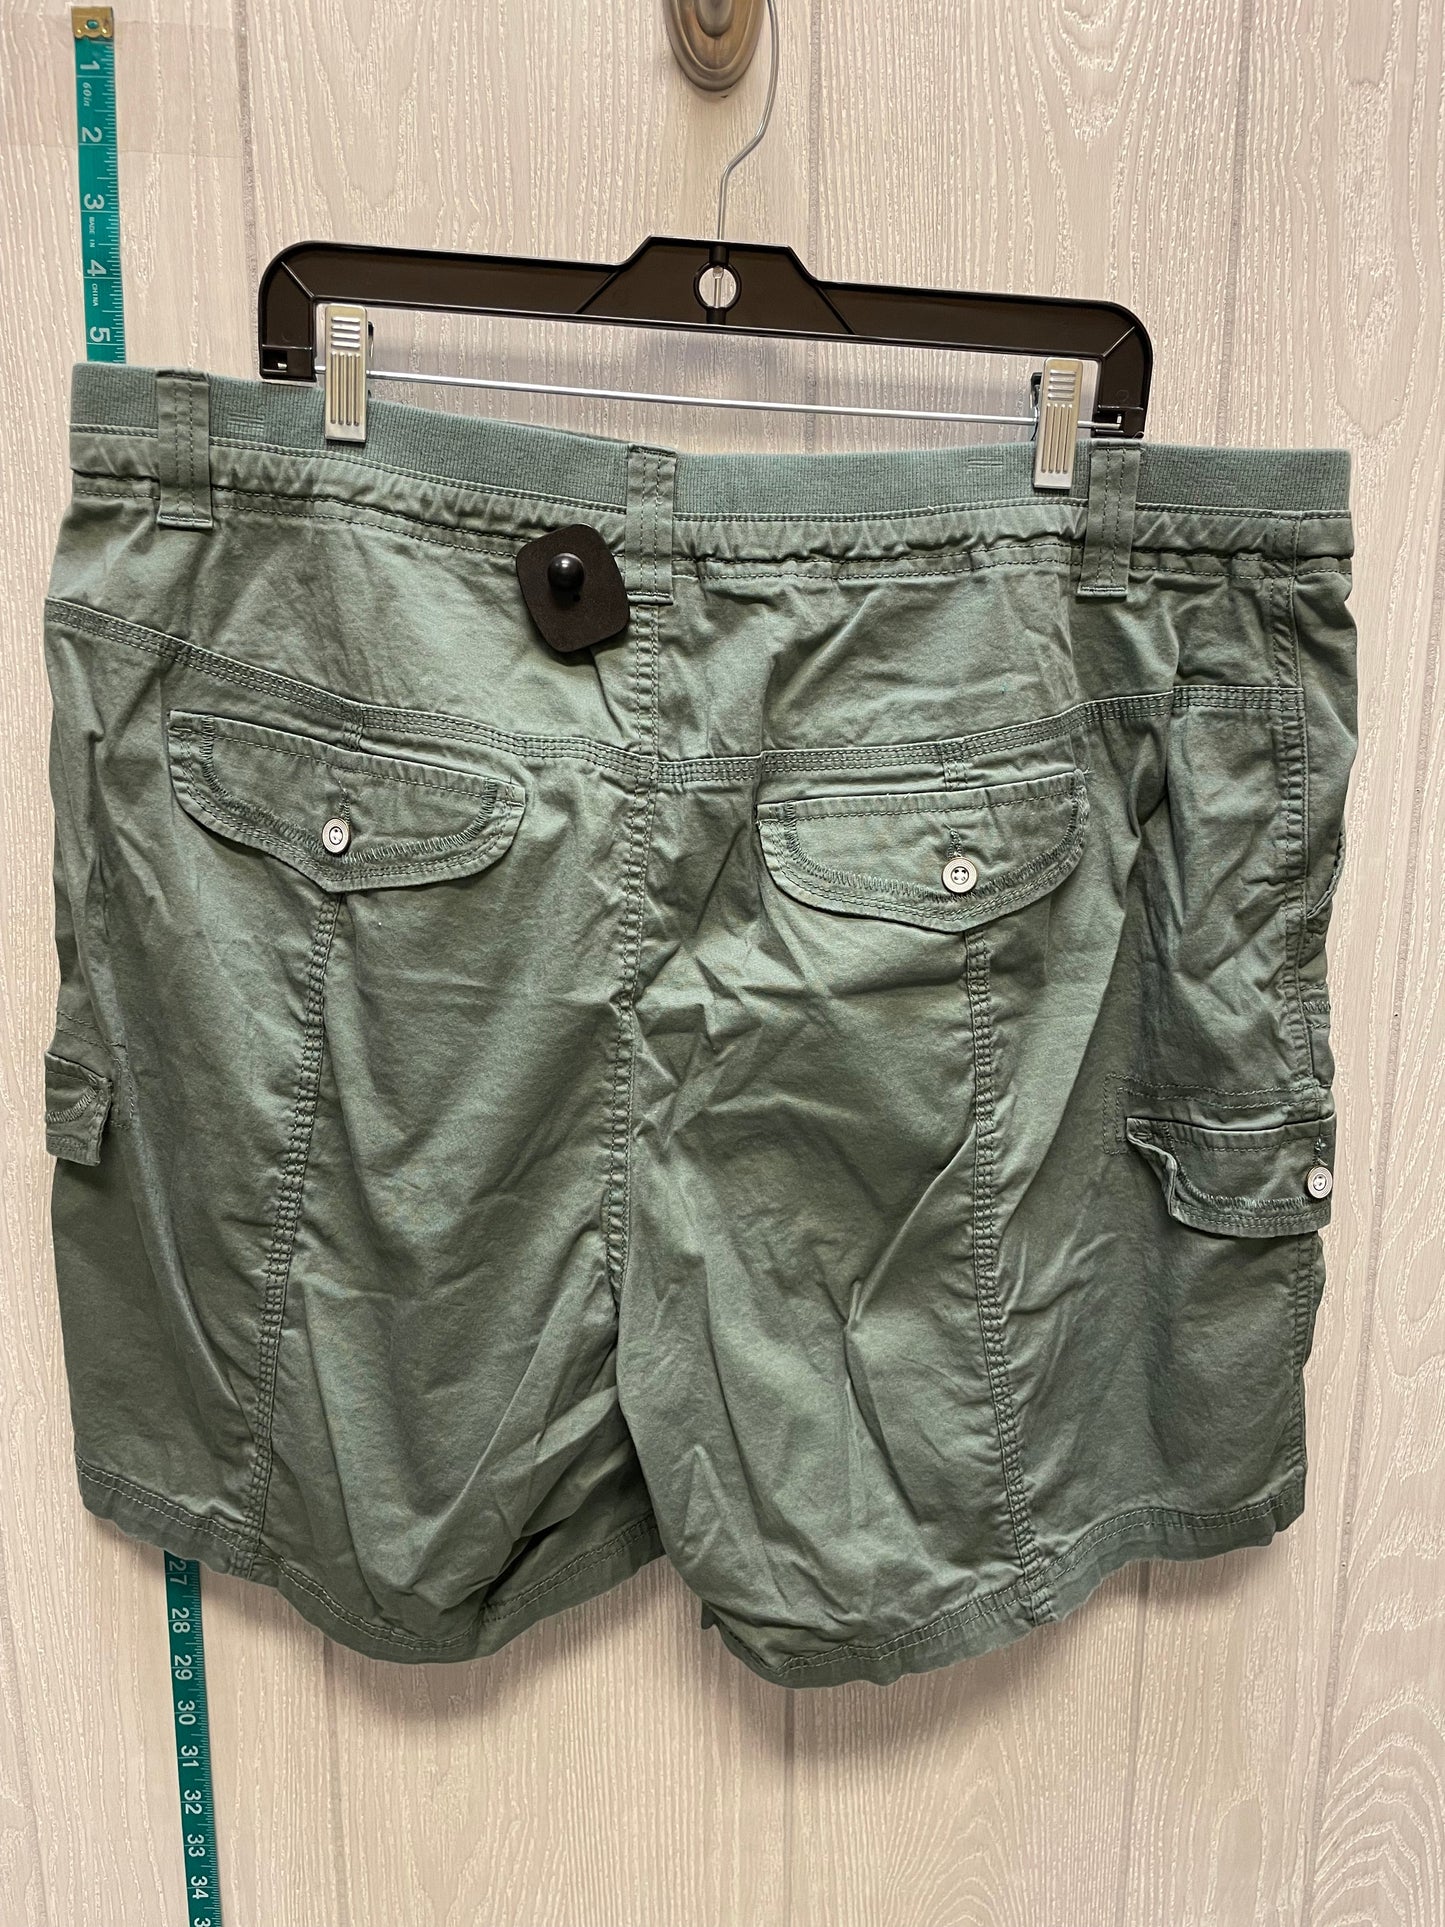 Green Shorts Style And Company, Size 20